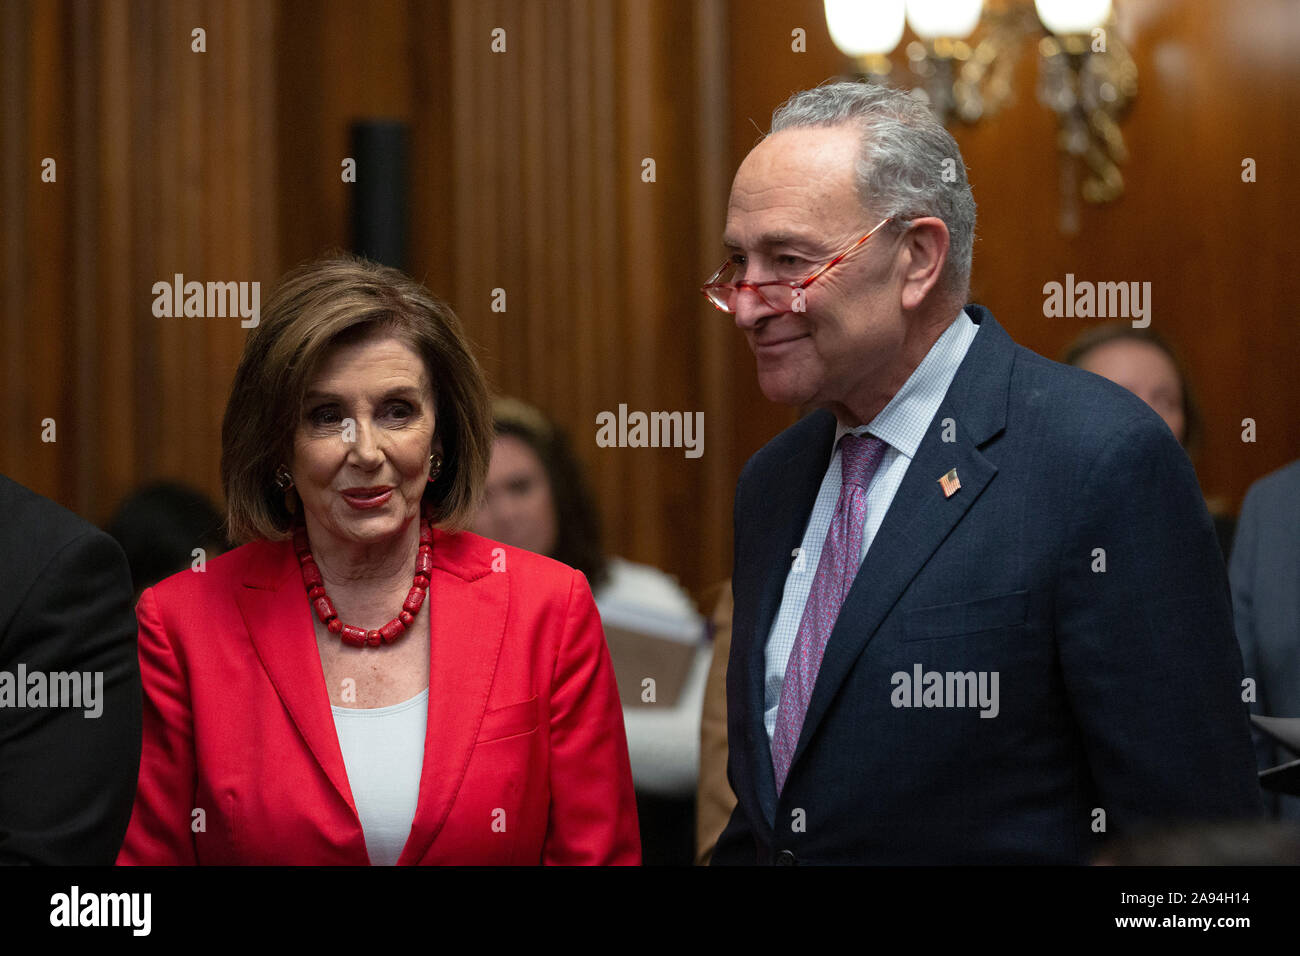 Speaker of the United States House of Representatives Nancy Pelosi (Democrat of California) and United States Senate Minority Leader Chuck Schumer (Democrat of New York), joined by other Democratic lawmakers, attend a press conference on the Deferred Action for Childhood Arrivals program on Capitol Hill in Washington, DC, U.S. on Tuesday, November 12, 2019. The Supreme Court is currently hearing a case that will determine the legality and future of the DACA program. Credit: Stefani Reynolds/CNP /MediaPunch Stock Photo